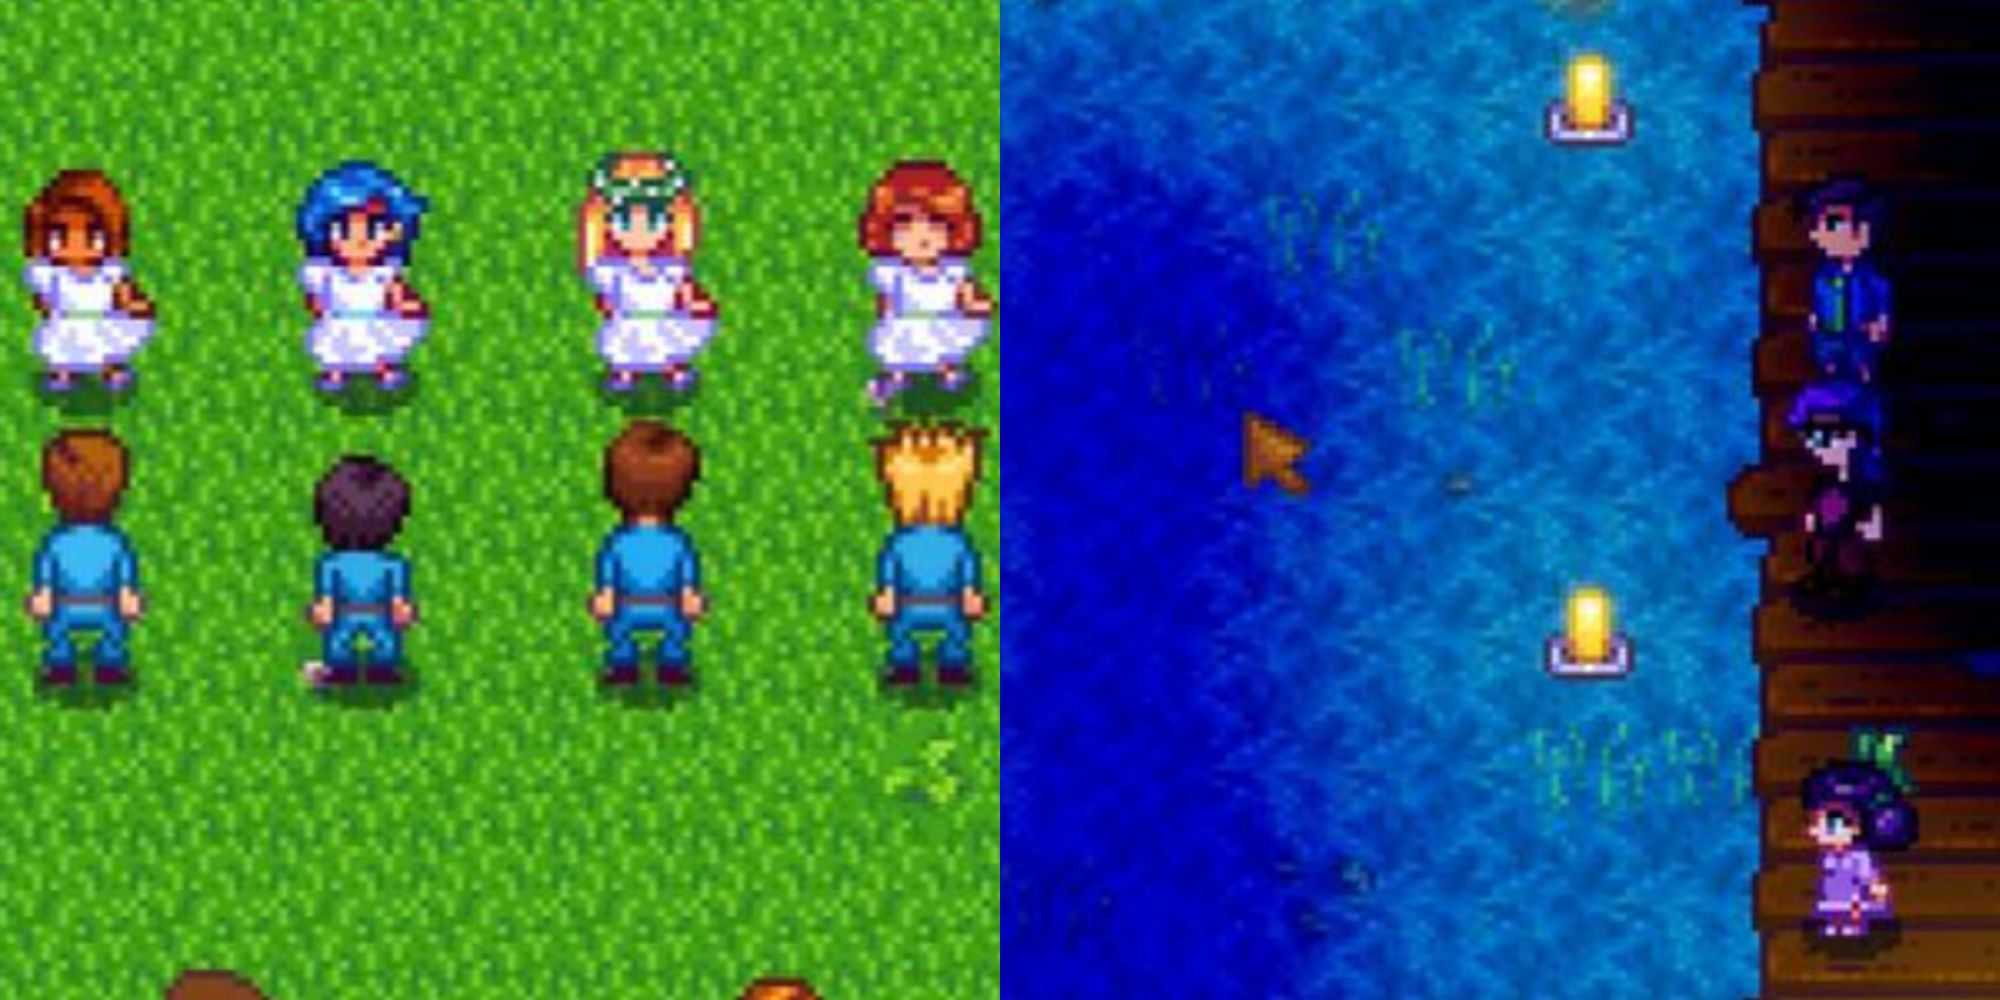 Stardew Valley characters readying for a dance, next to the Stardew Valley docks as villagers gaze out at the sea